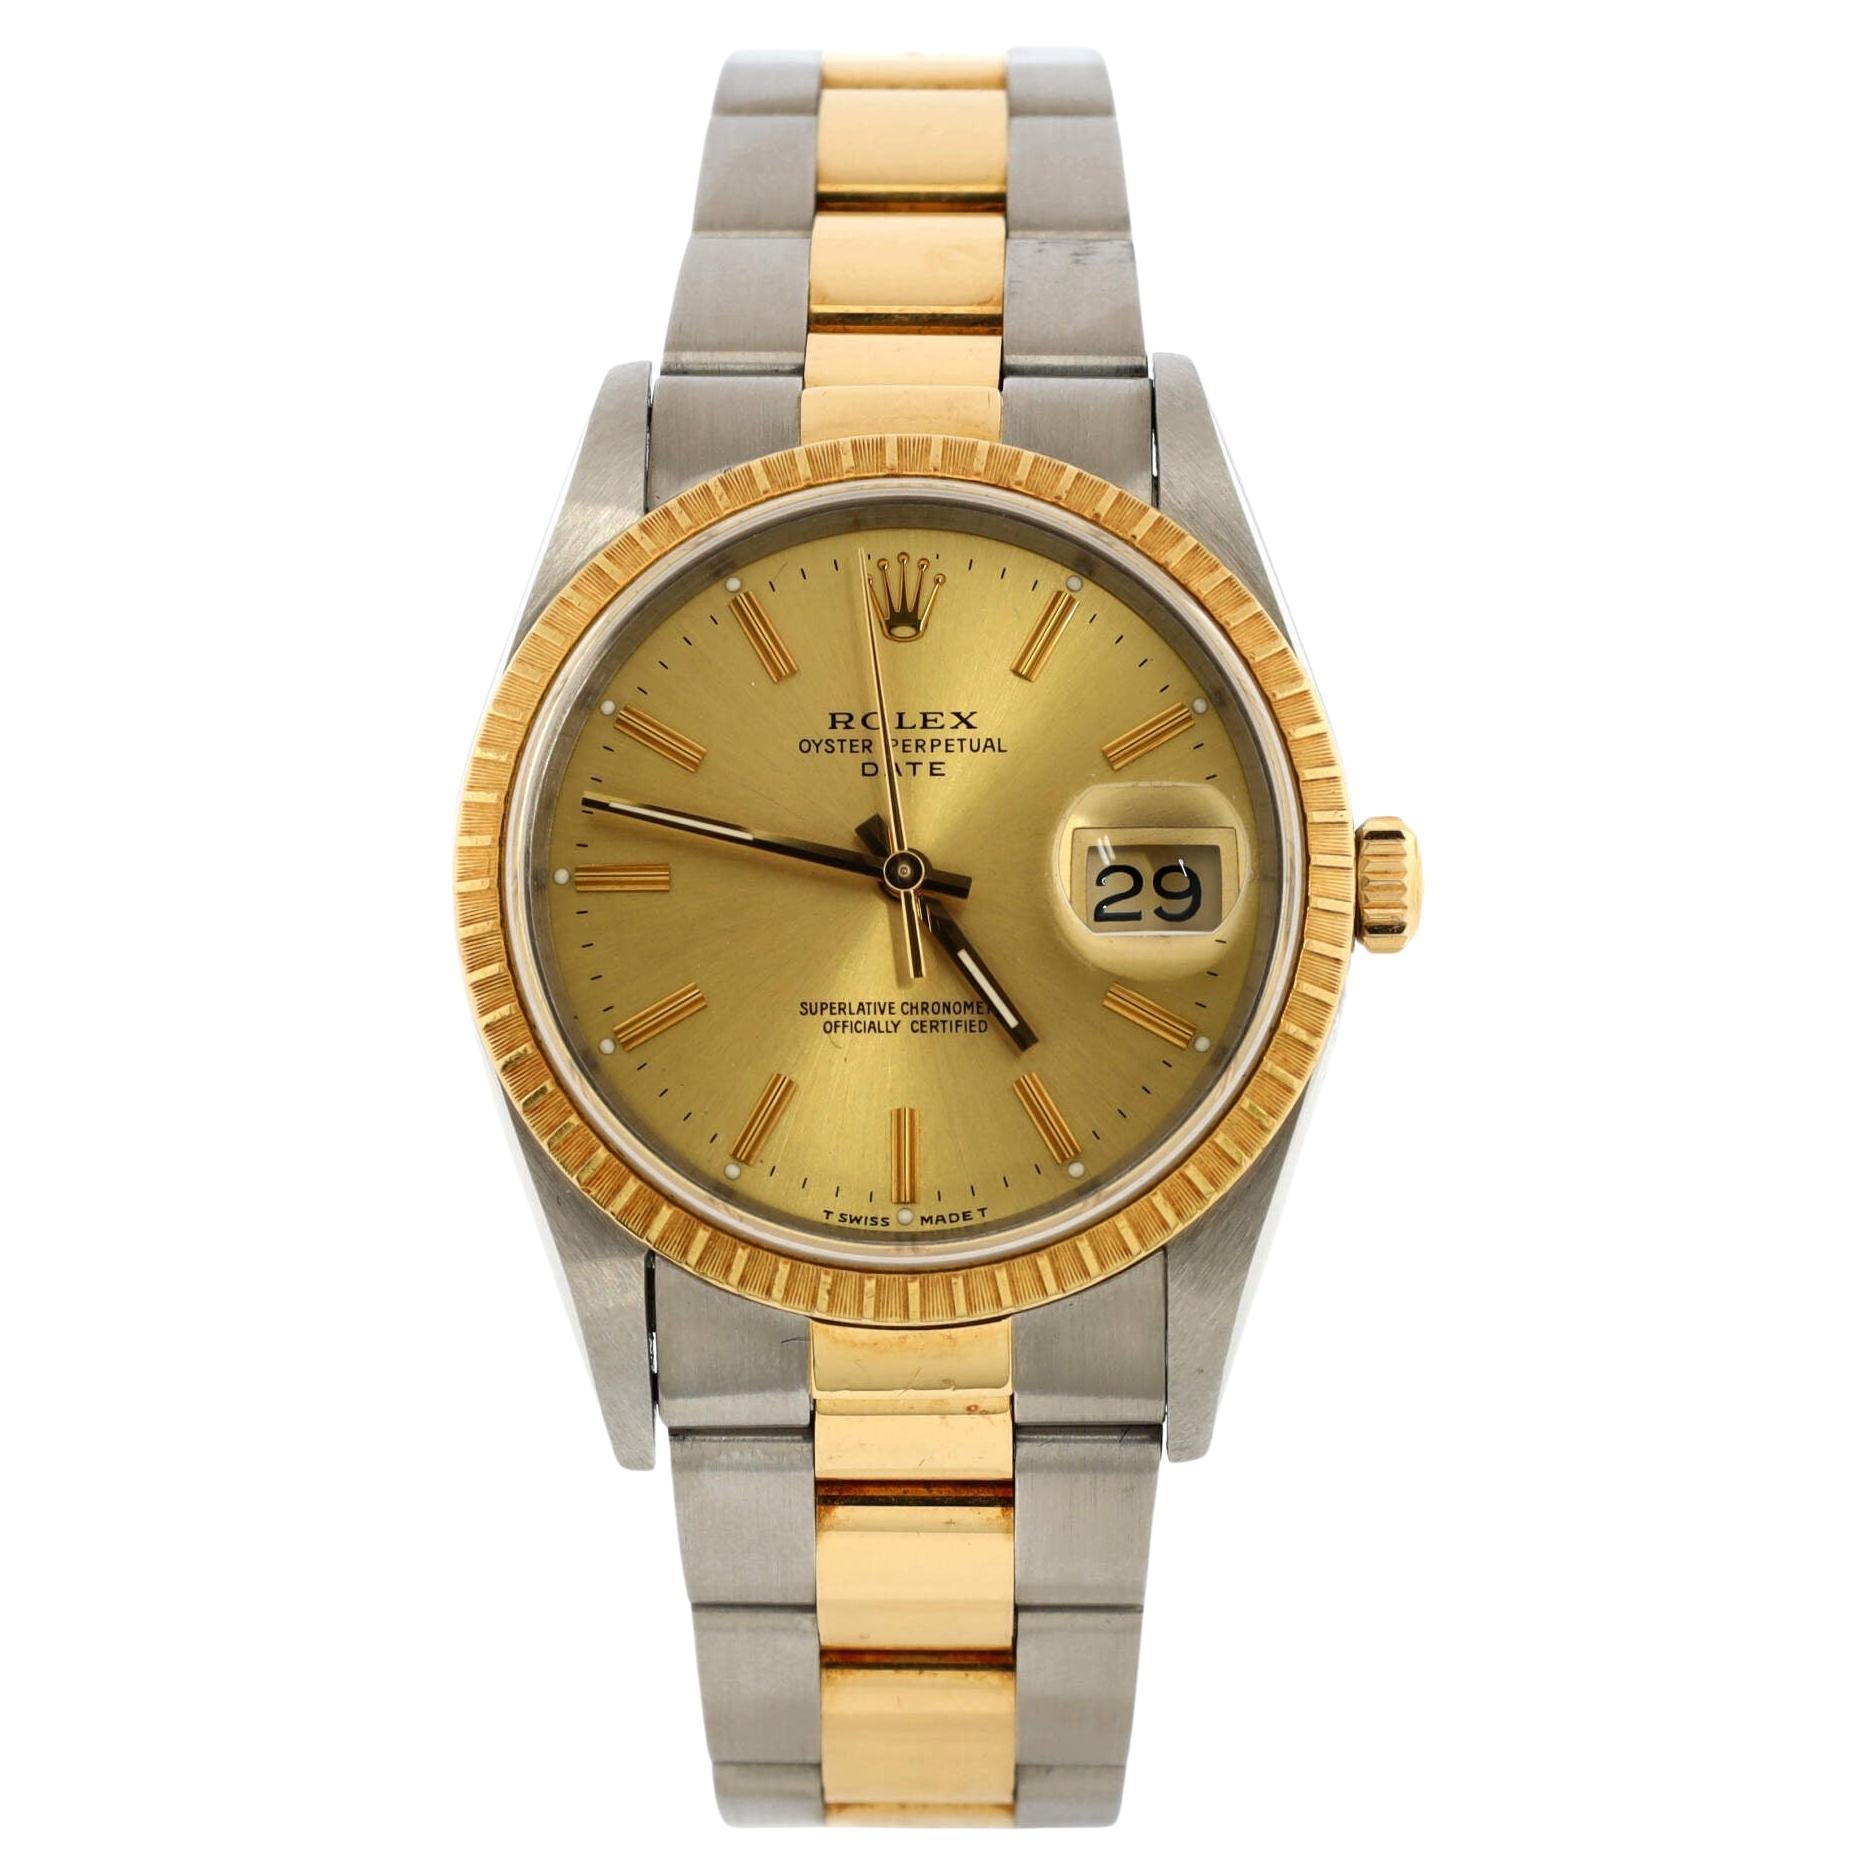 Rolex Oyster Perpetual Datejust Automatic Watch Stainless Steel and Yellow Gold 